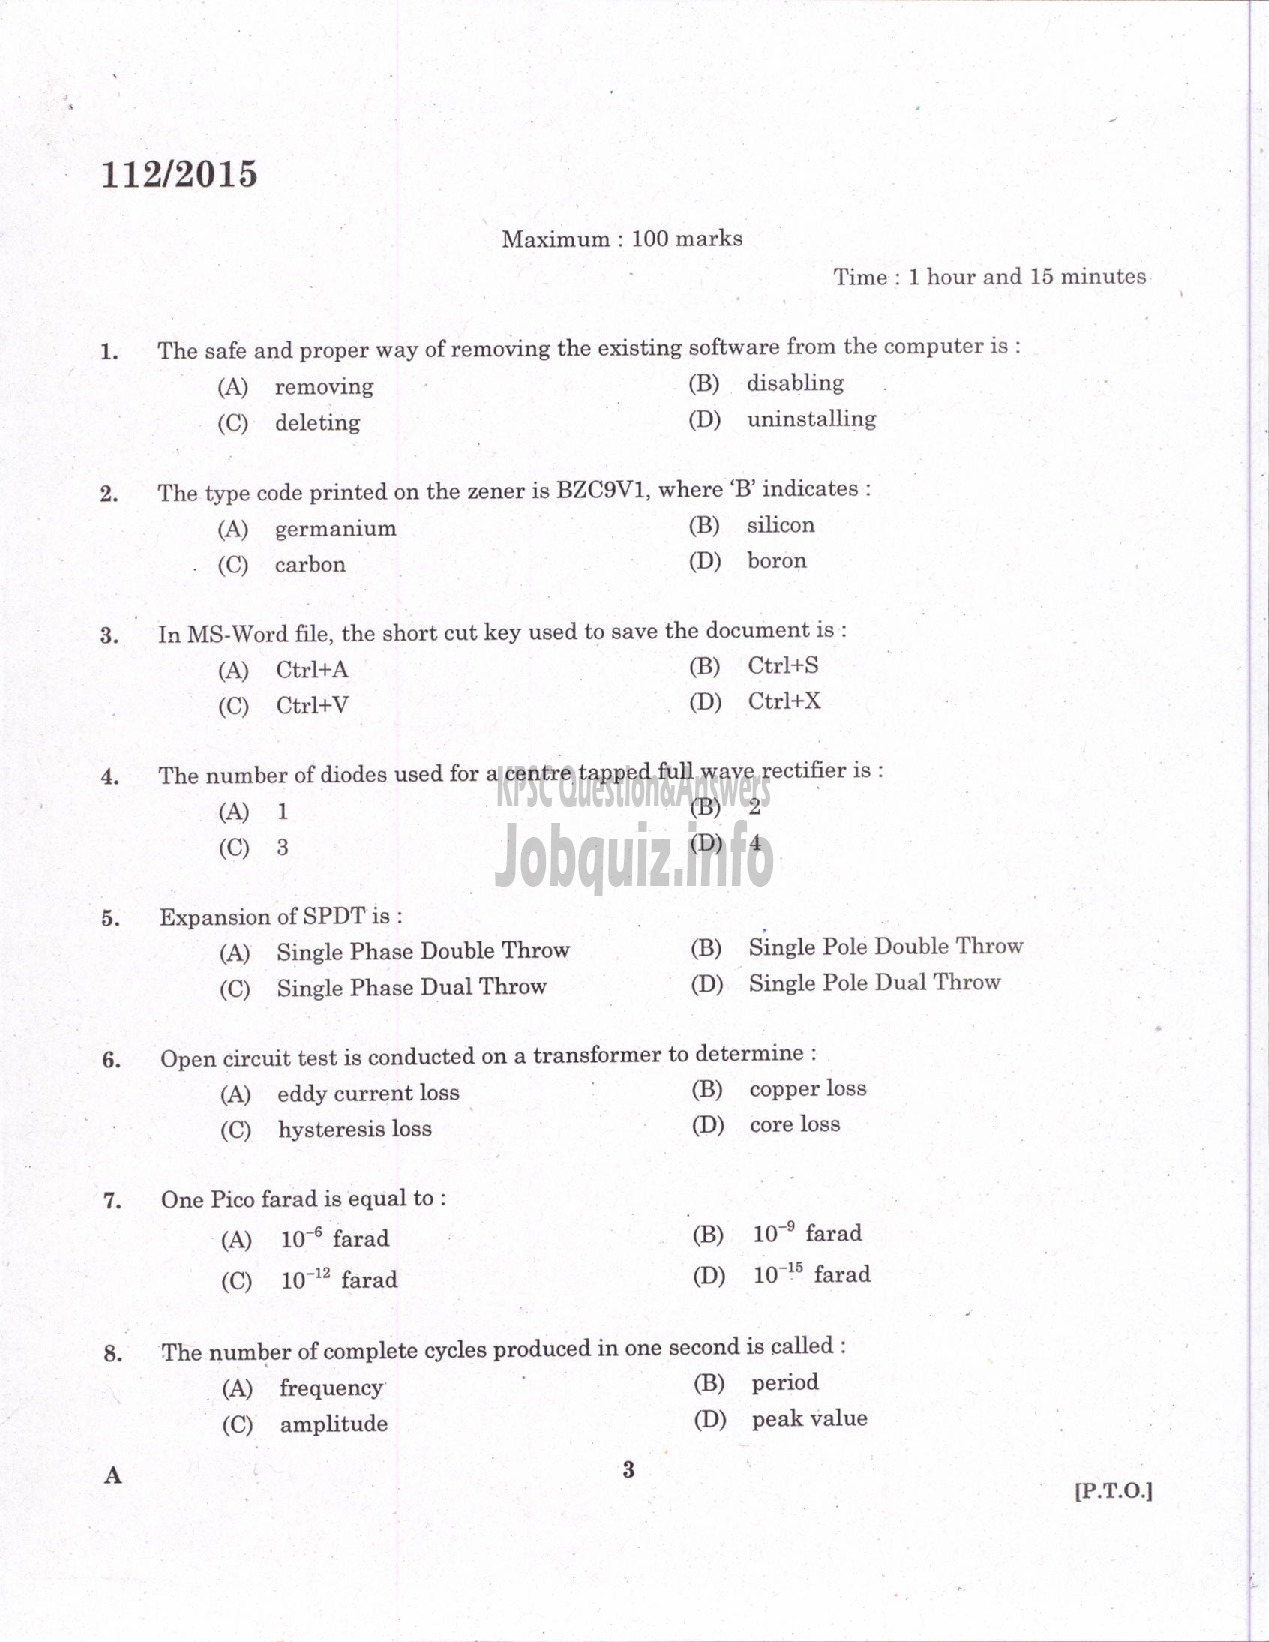 Kerala PSC Question Paper - TRADESMAN ELECTRICAL TECHNICAL EDUCATION/ELECTRICIAN GROUND WATER /ELECTRICIAN GR II PRINTING GOVT PRESSES ELECTRICIAN AGRICULTURE /ELECTRICIAN GR II THE KERALA CERAMICS LTD-1